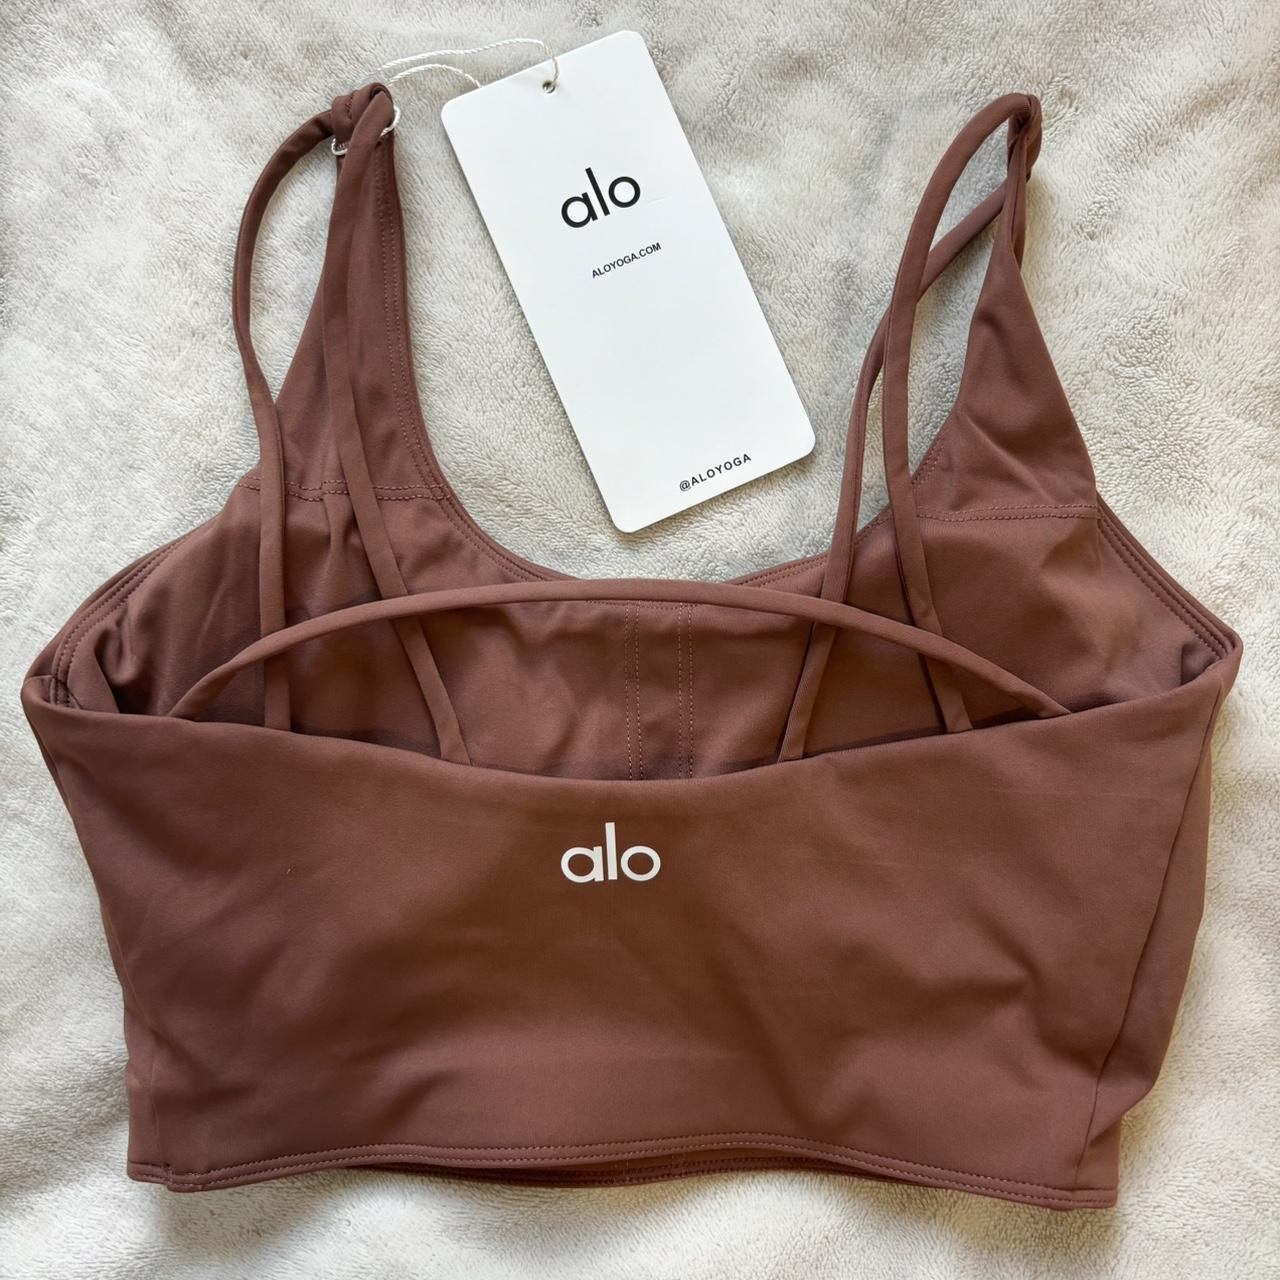 ALO bra top size medium! Worn once. Bought for $68 - Depop